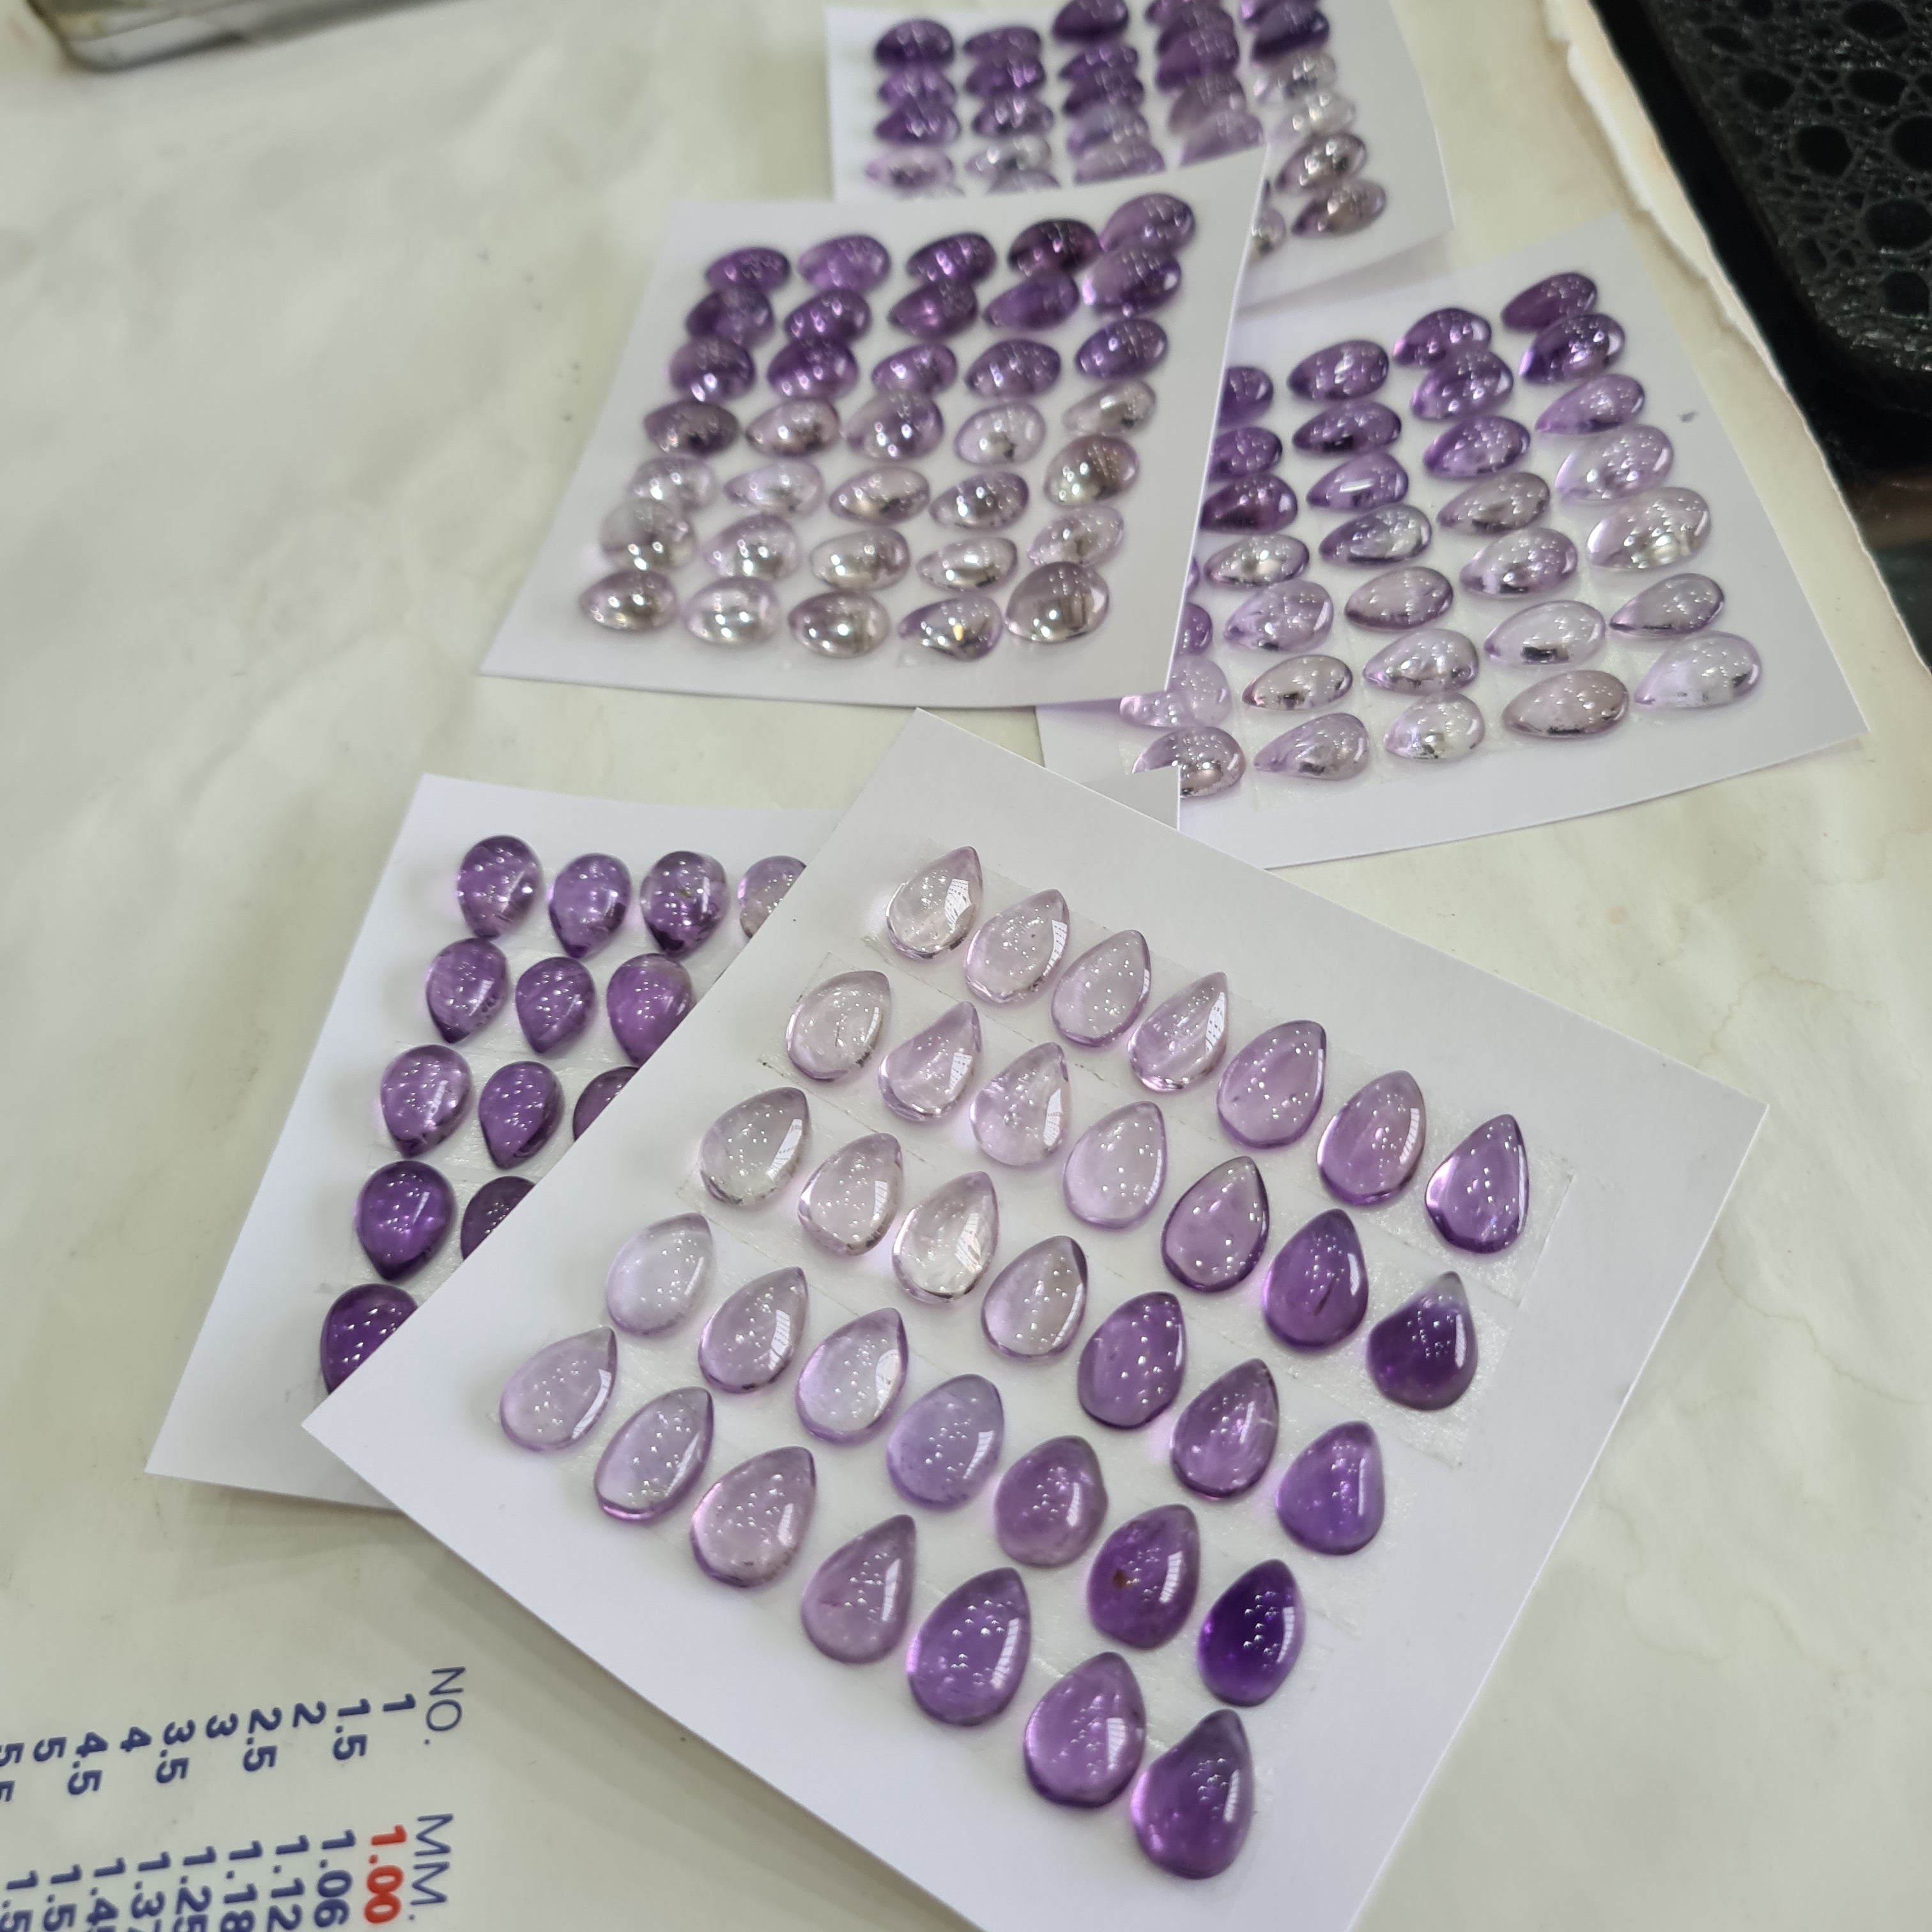 35 Pieces Amethyst Cabochon Pear Shaded Colours | 10-12mm - The LabradoriteKing